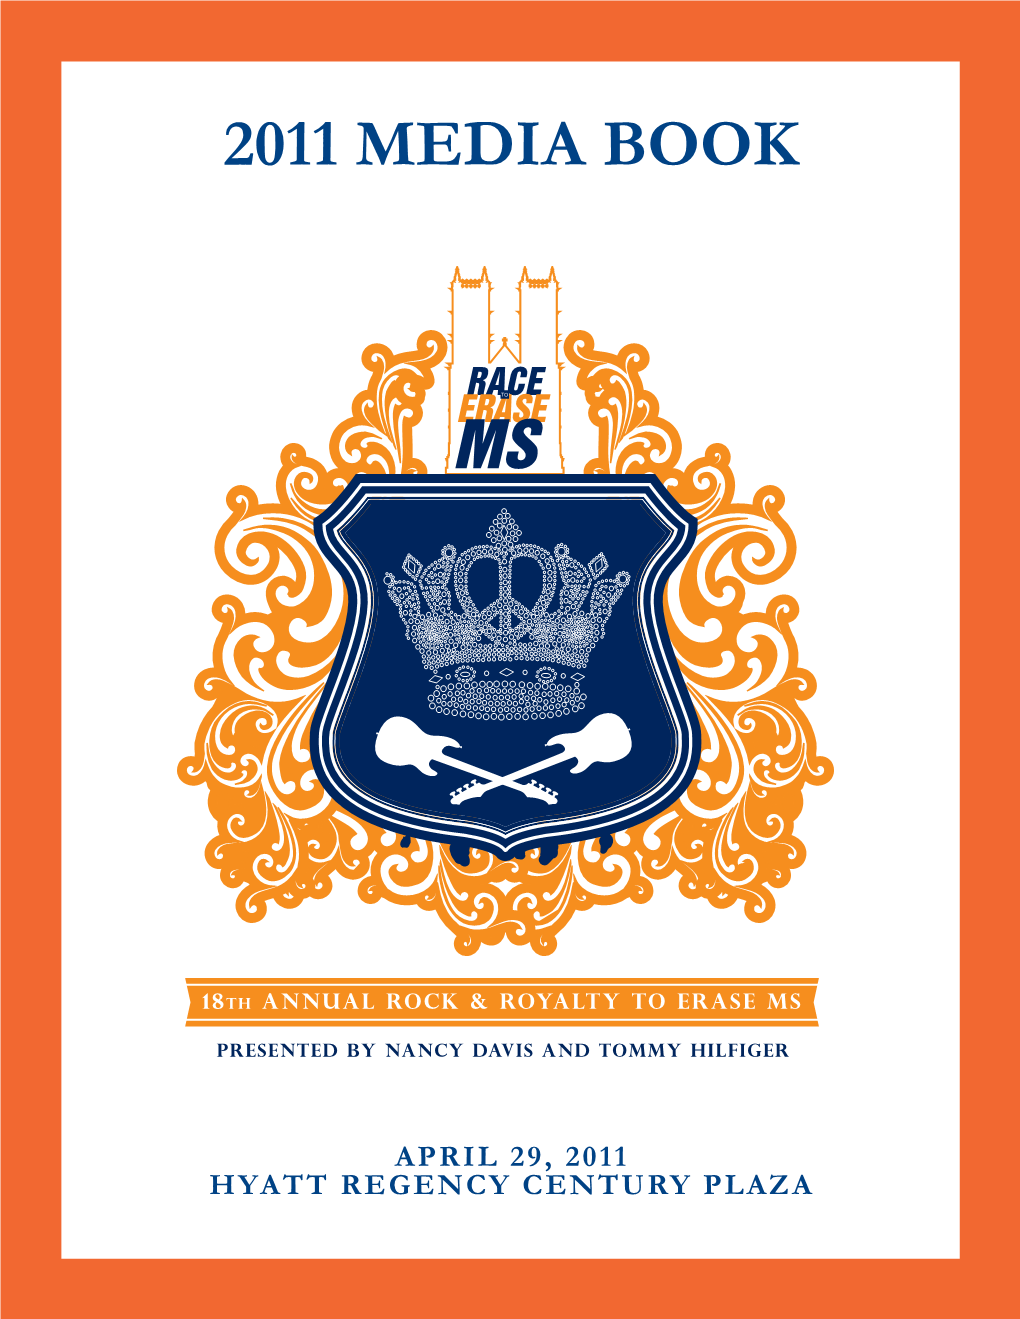 Download the 2011 Media Book